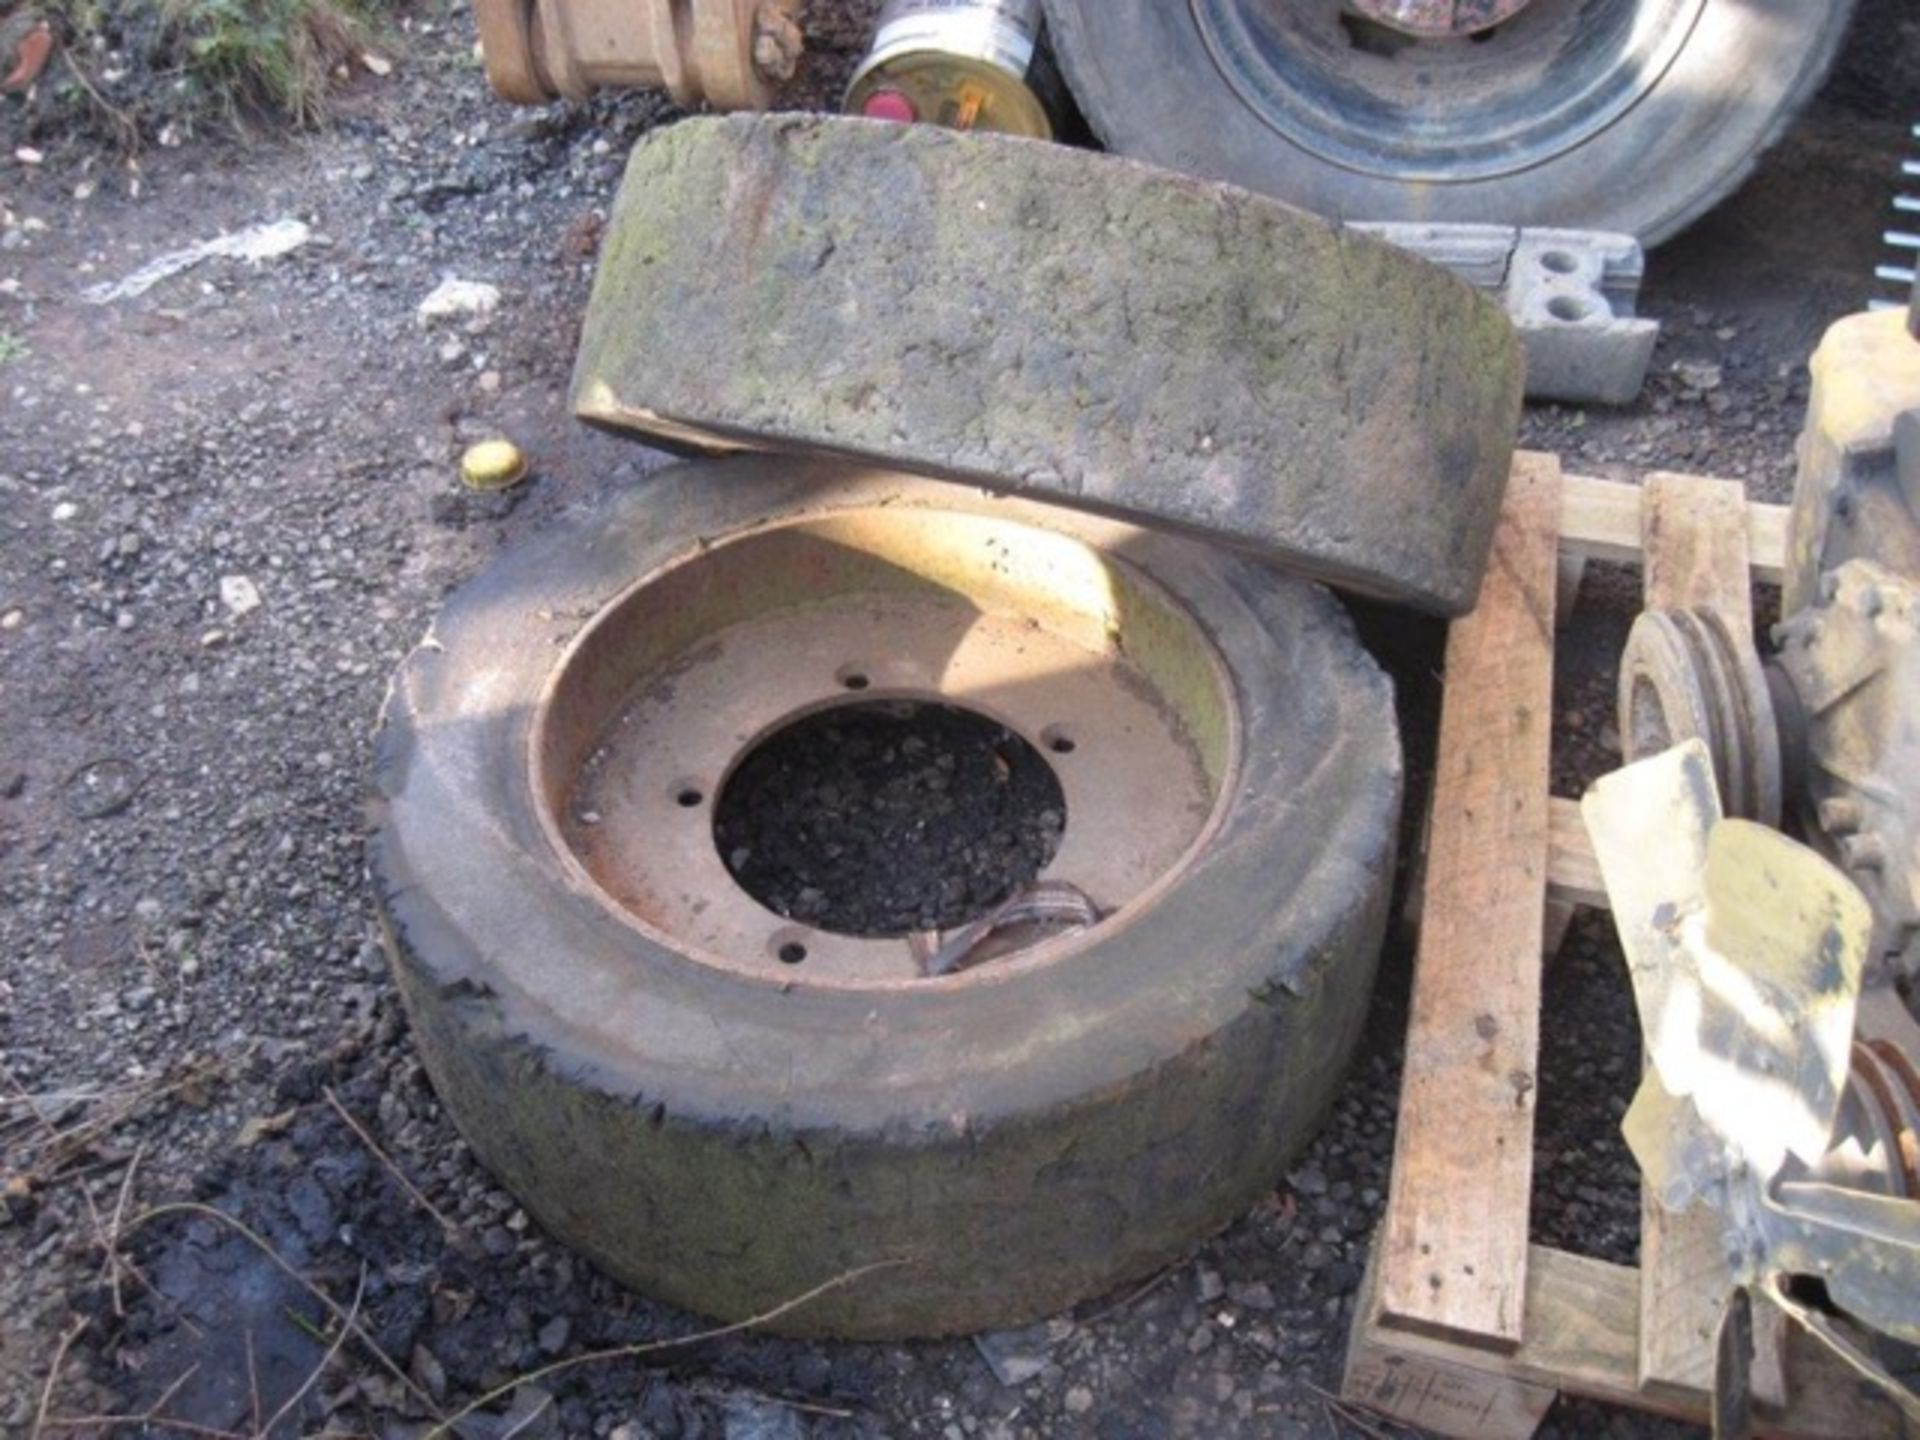 Solid JCB Wheels and tyres
2 Good solid wheels and tyres on JCB 5 stud wheels